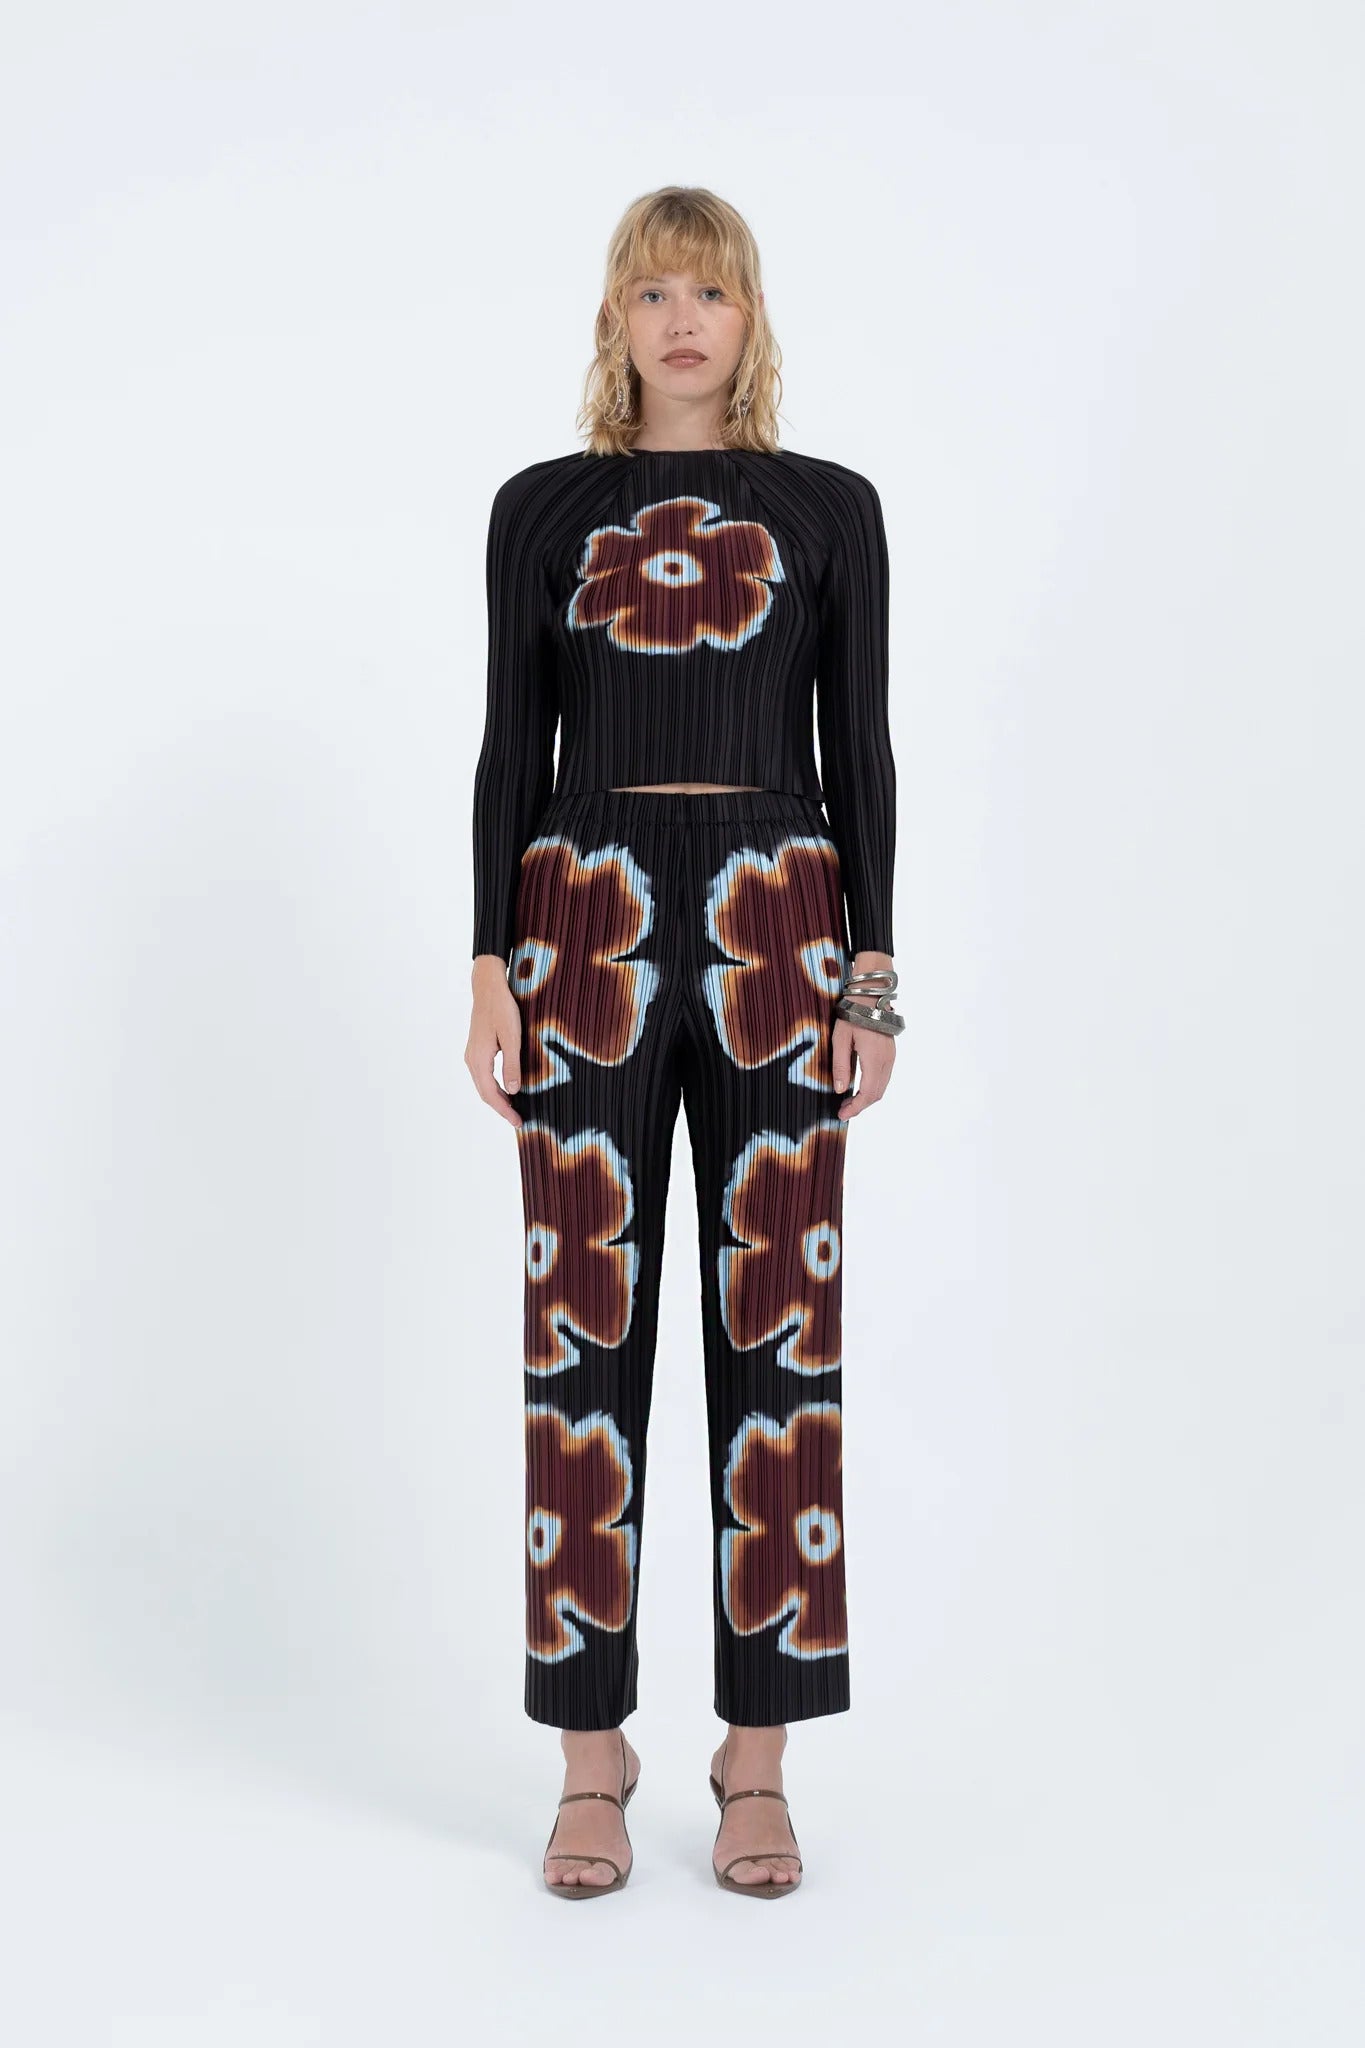 Zara's silk trousers harness the power of flowers  Georgia Straight  Vancouver's source for arts, culture, and events